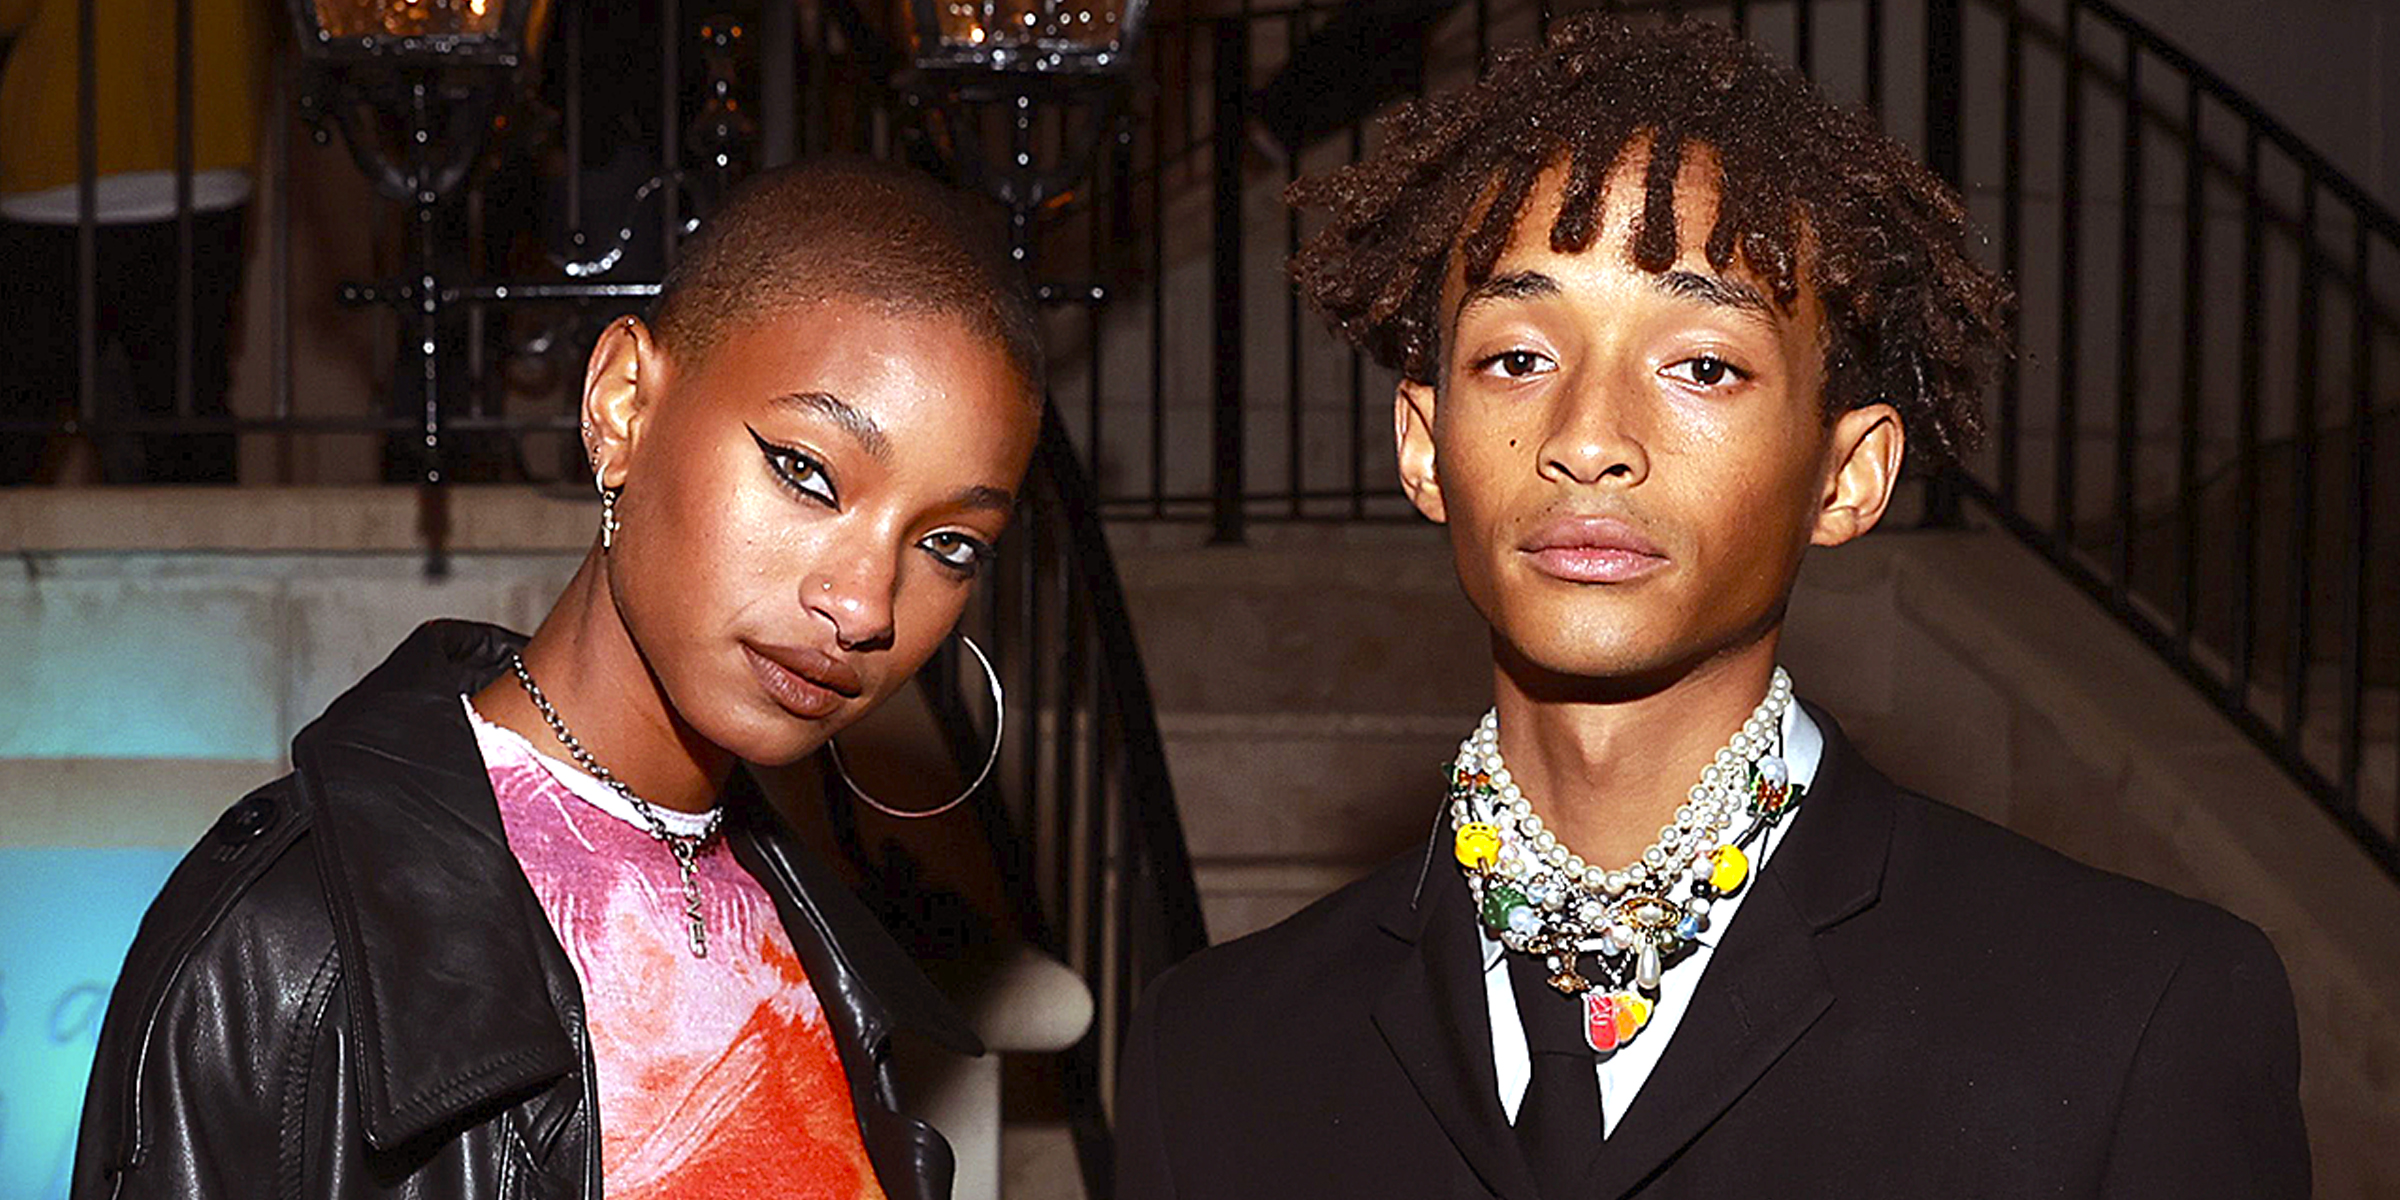 Jaden Smith and Willow Smith | Source: Getty Images